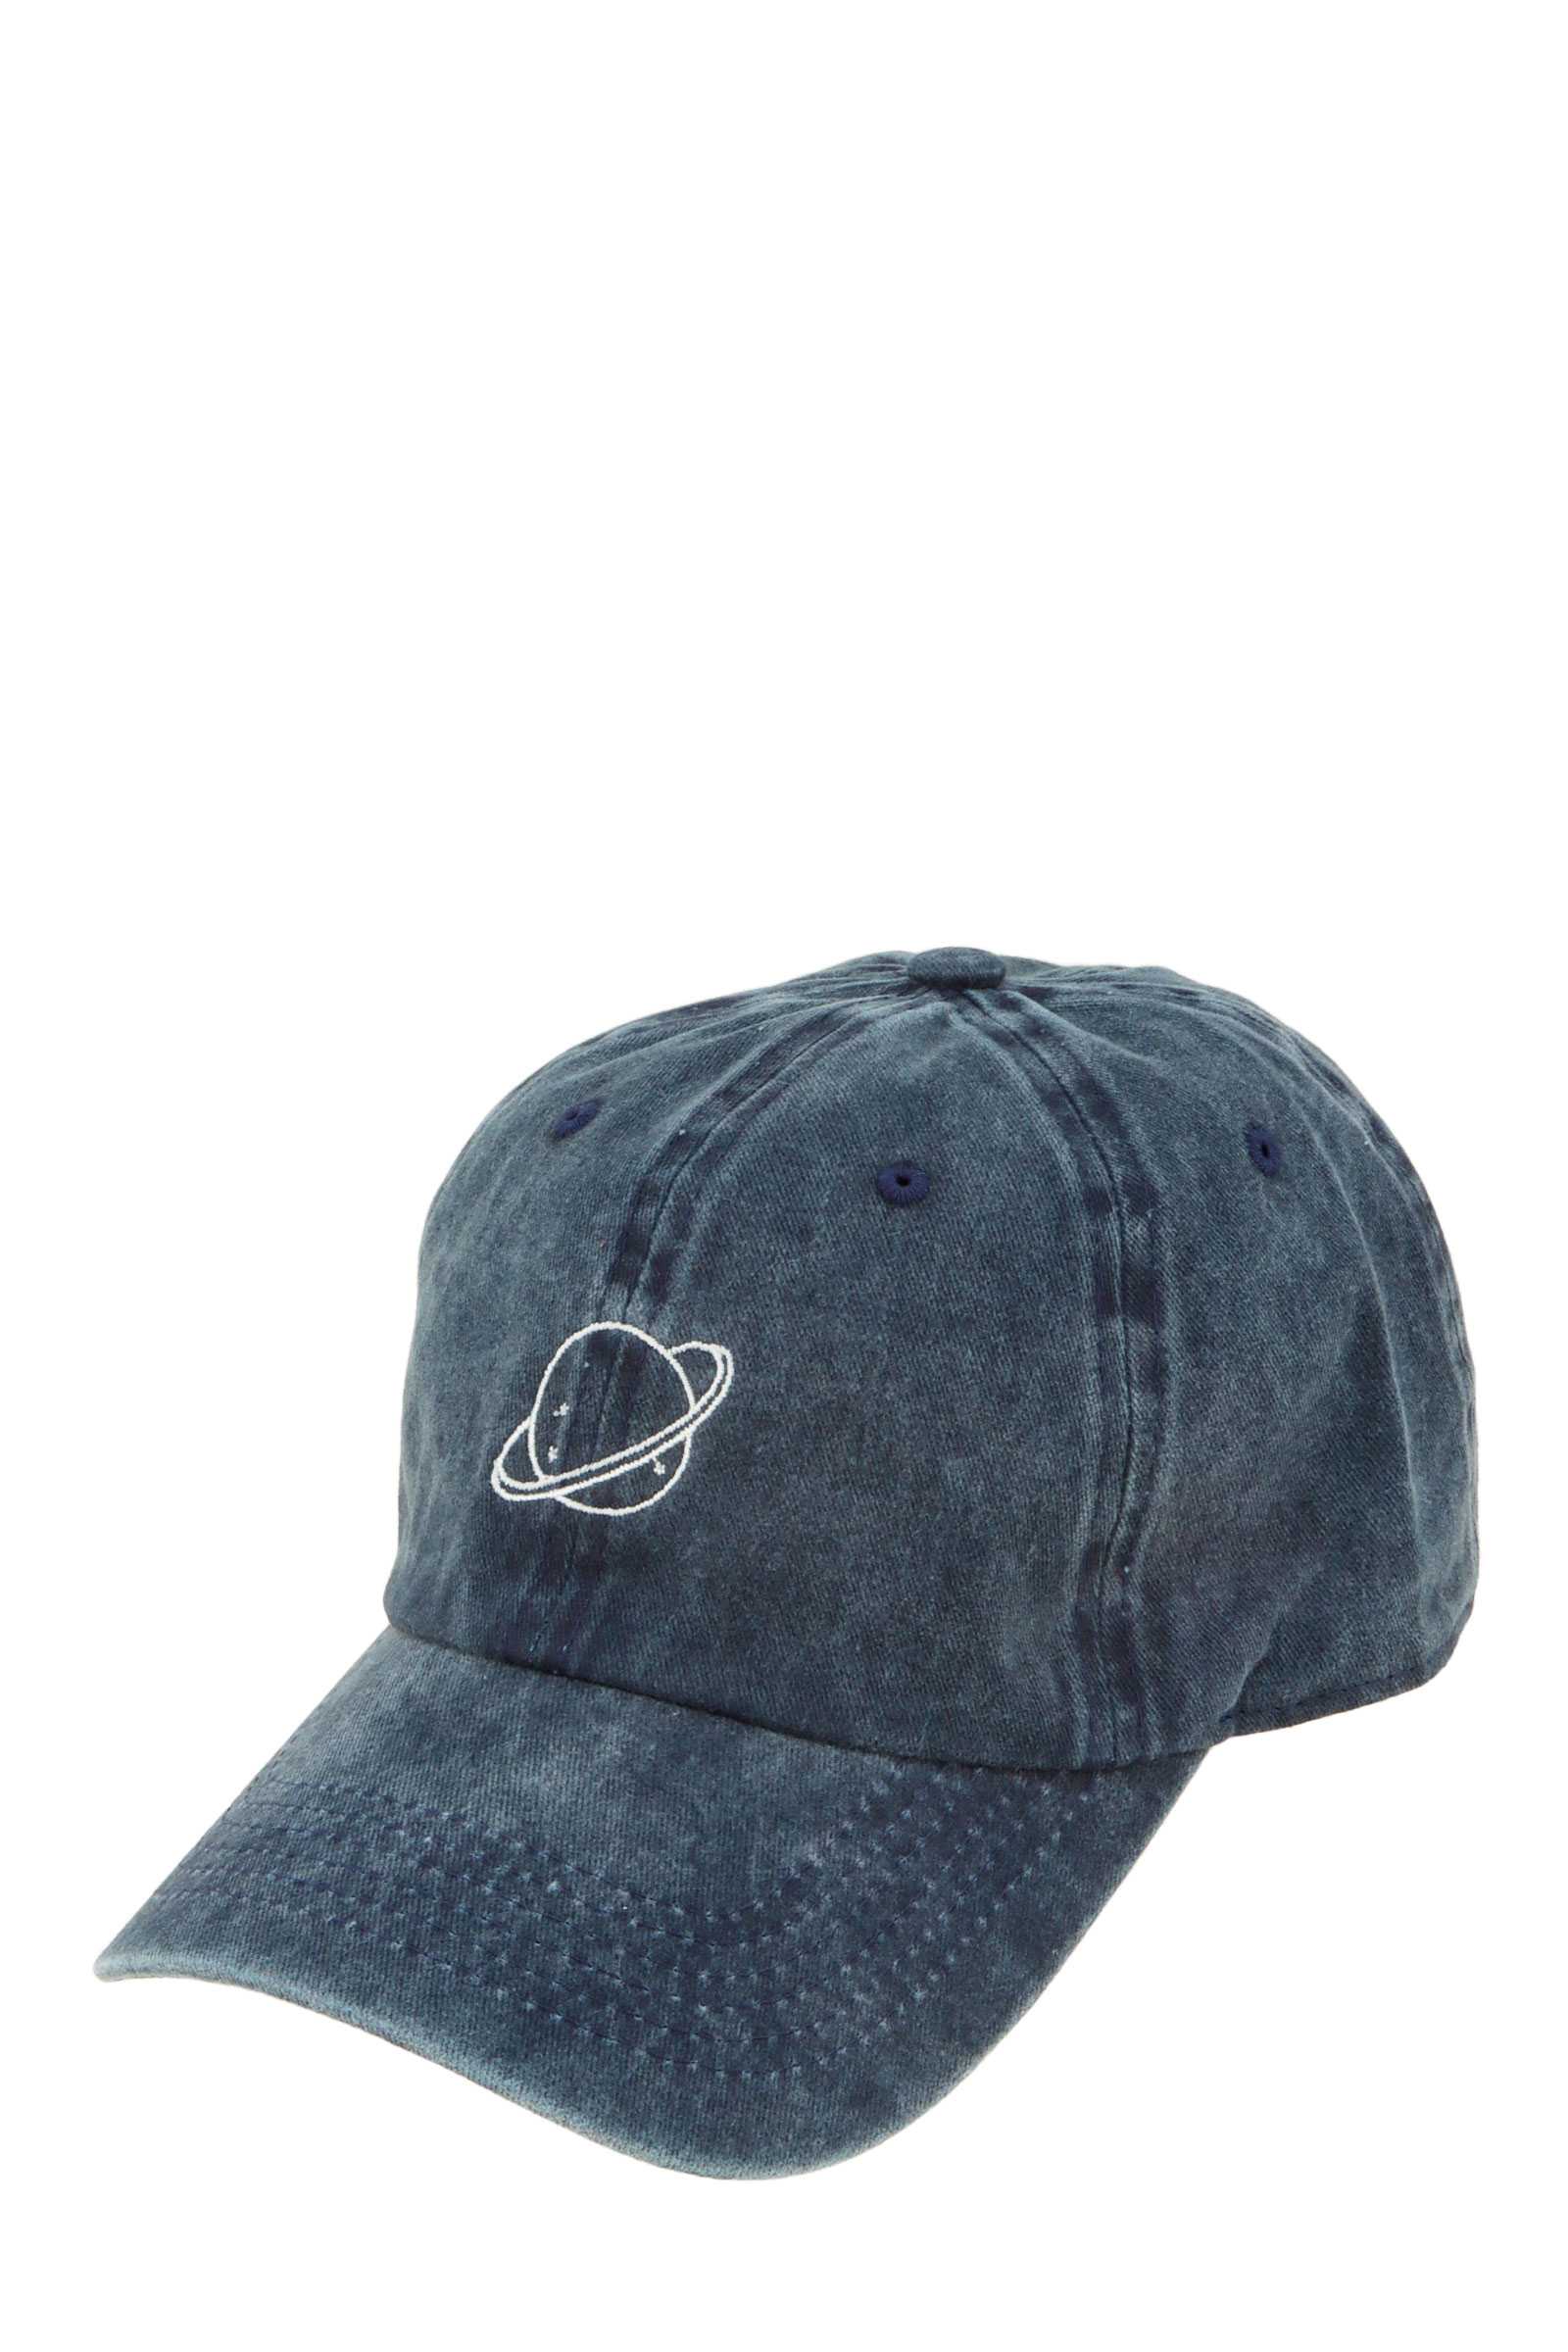 Planet with Stars Embroidery Pigment Cap